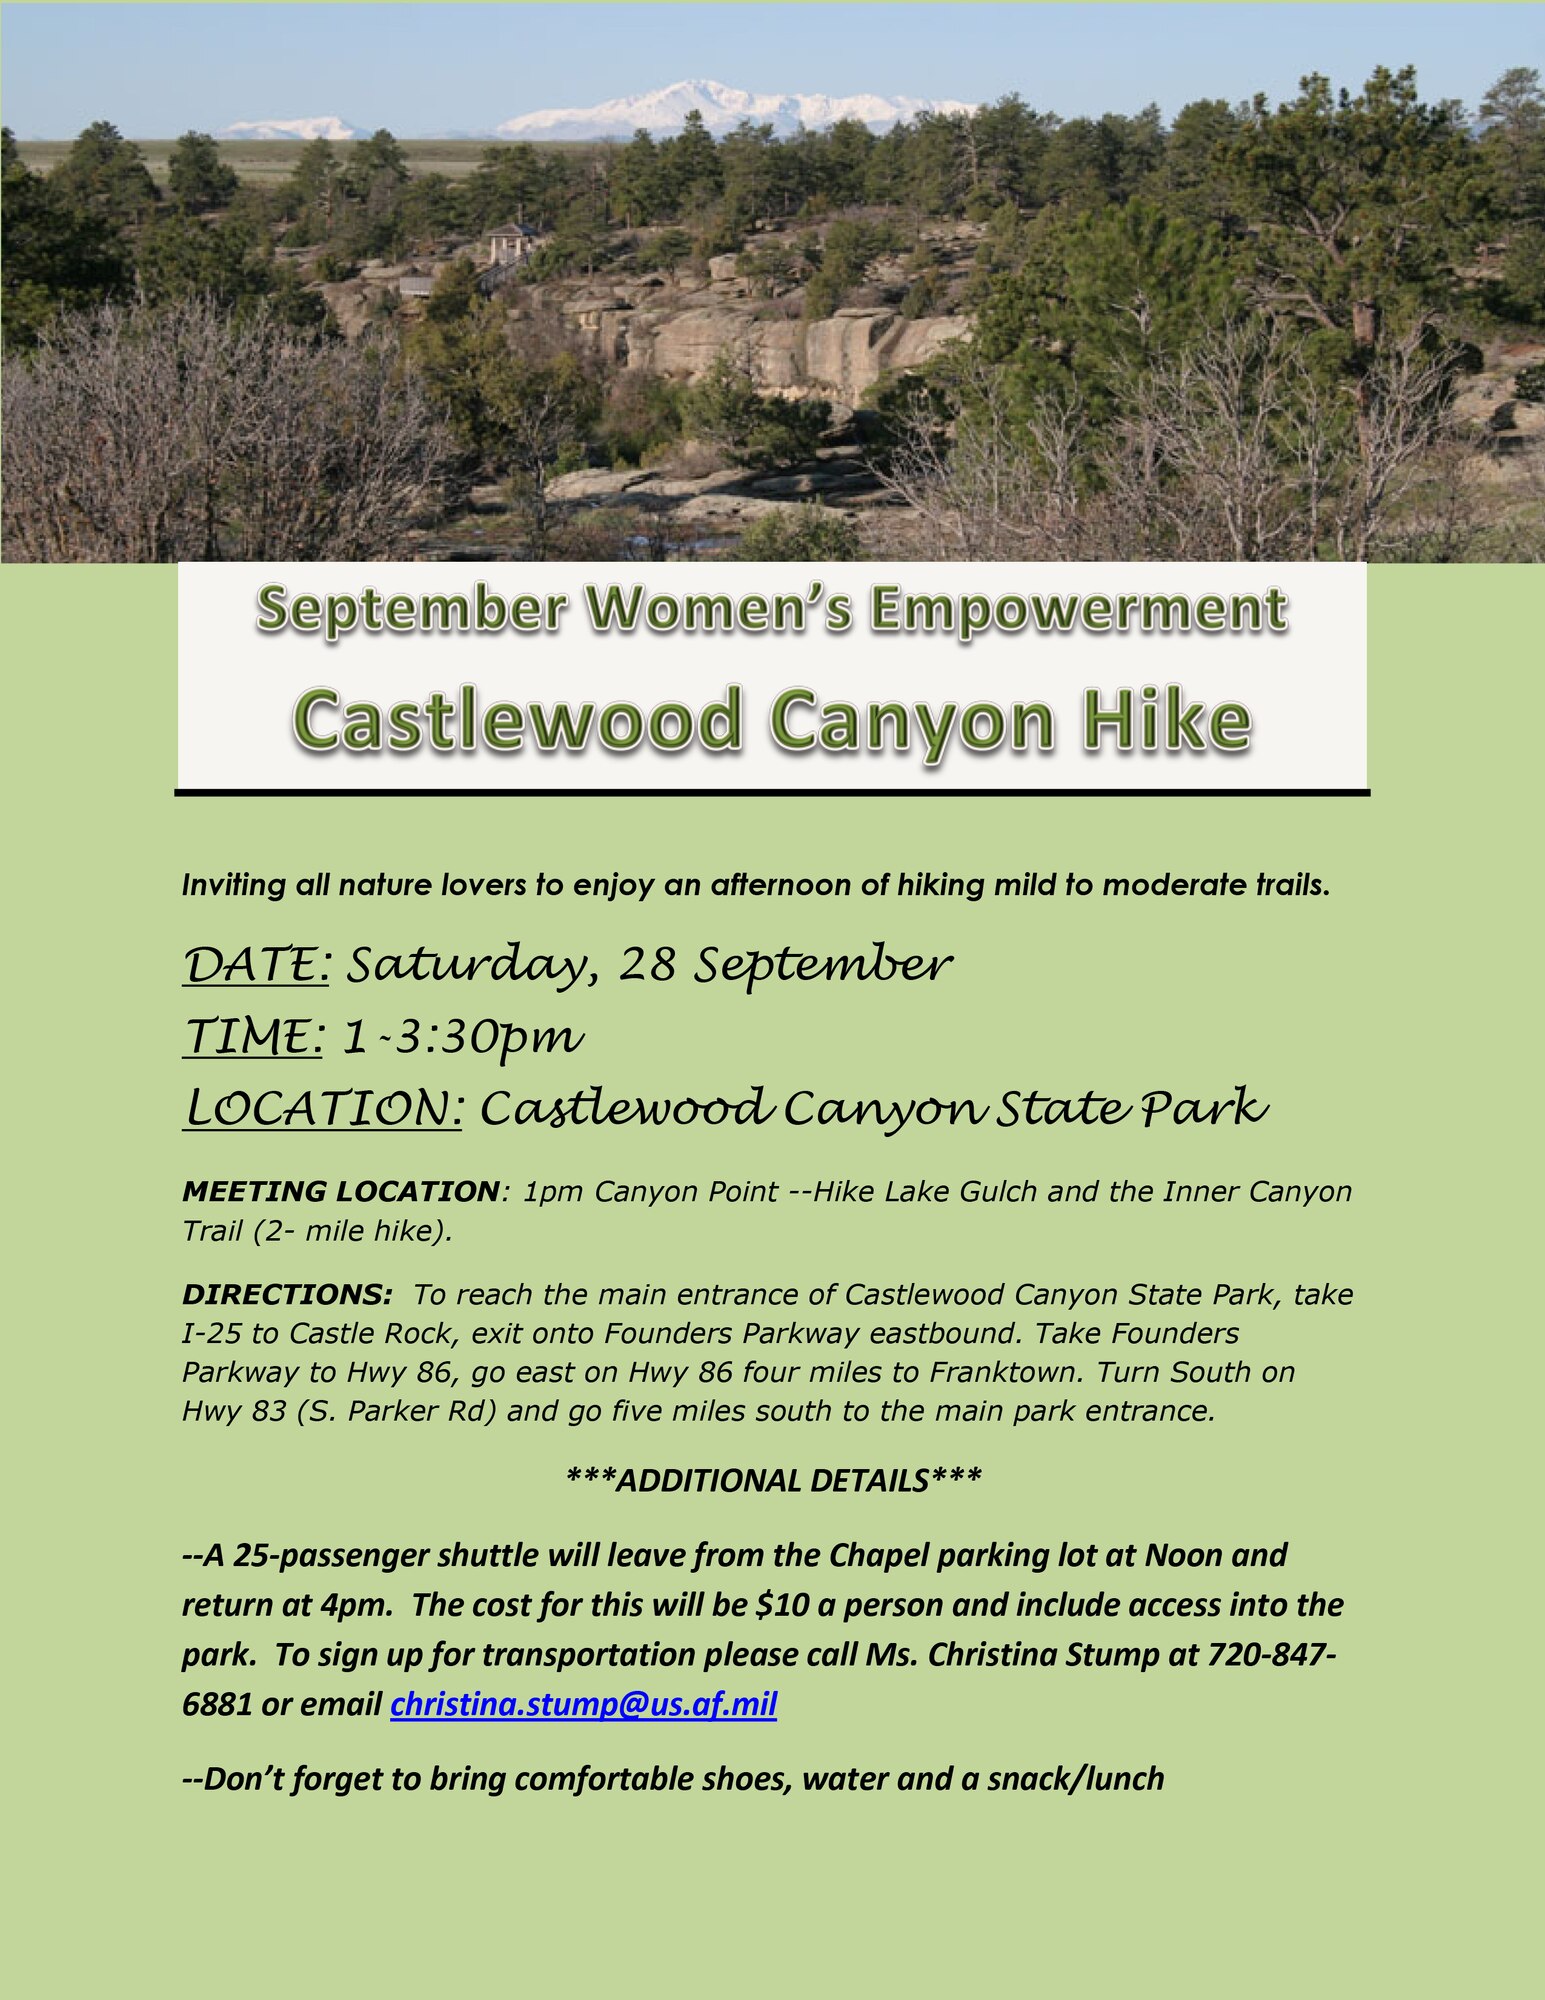 Team Buckley is holding the September Women’s Empowerment Group event Sept. 28, 2013, at the Castlewood Canyon State Park, Colo. The 2-mile hike will begin at Canyon Point and travels to Lake Gulch and Inner Canyon Trail. (Courtesy Photo)